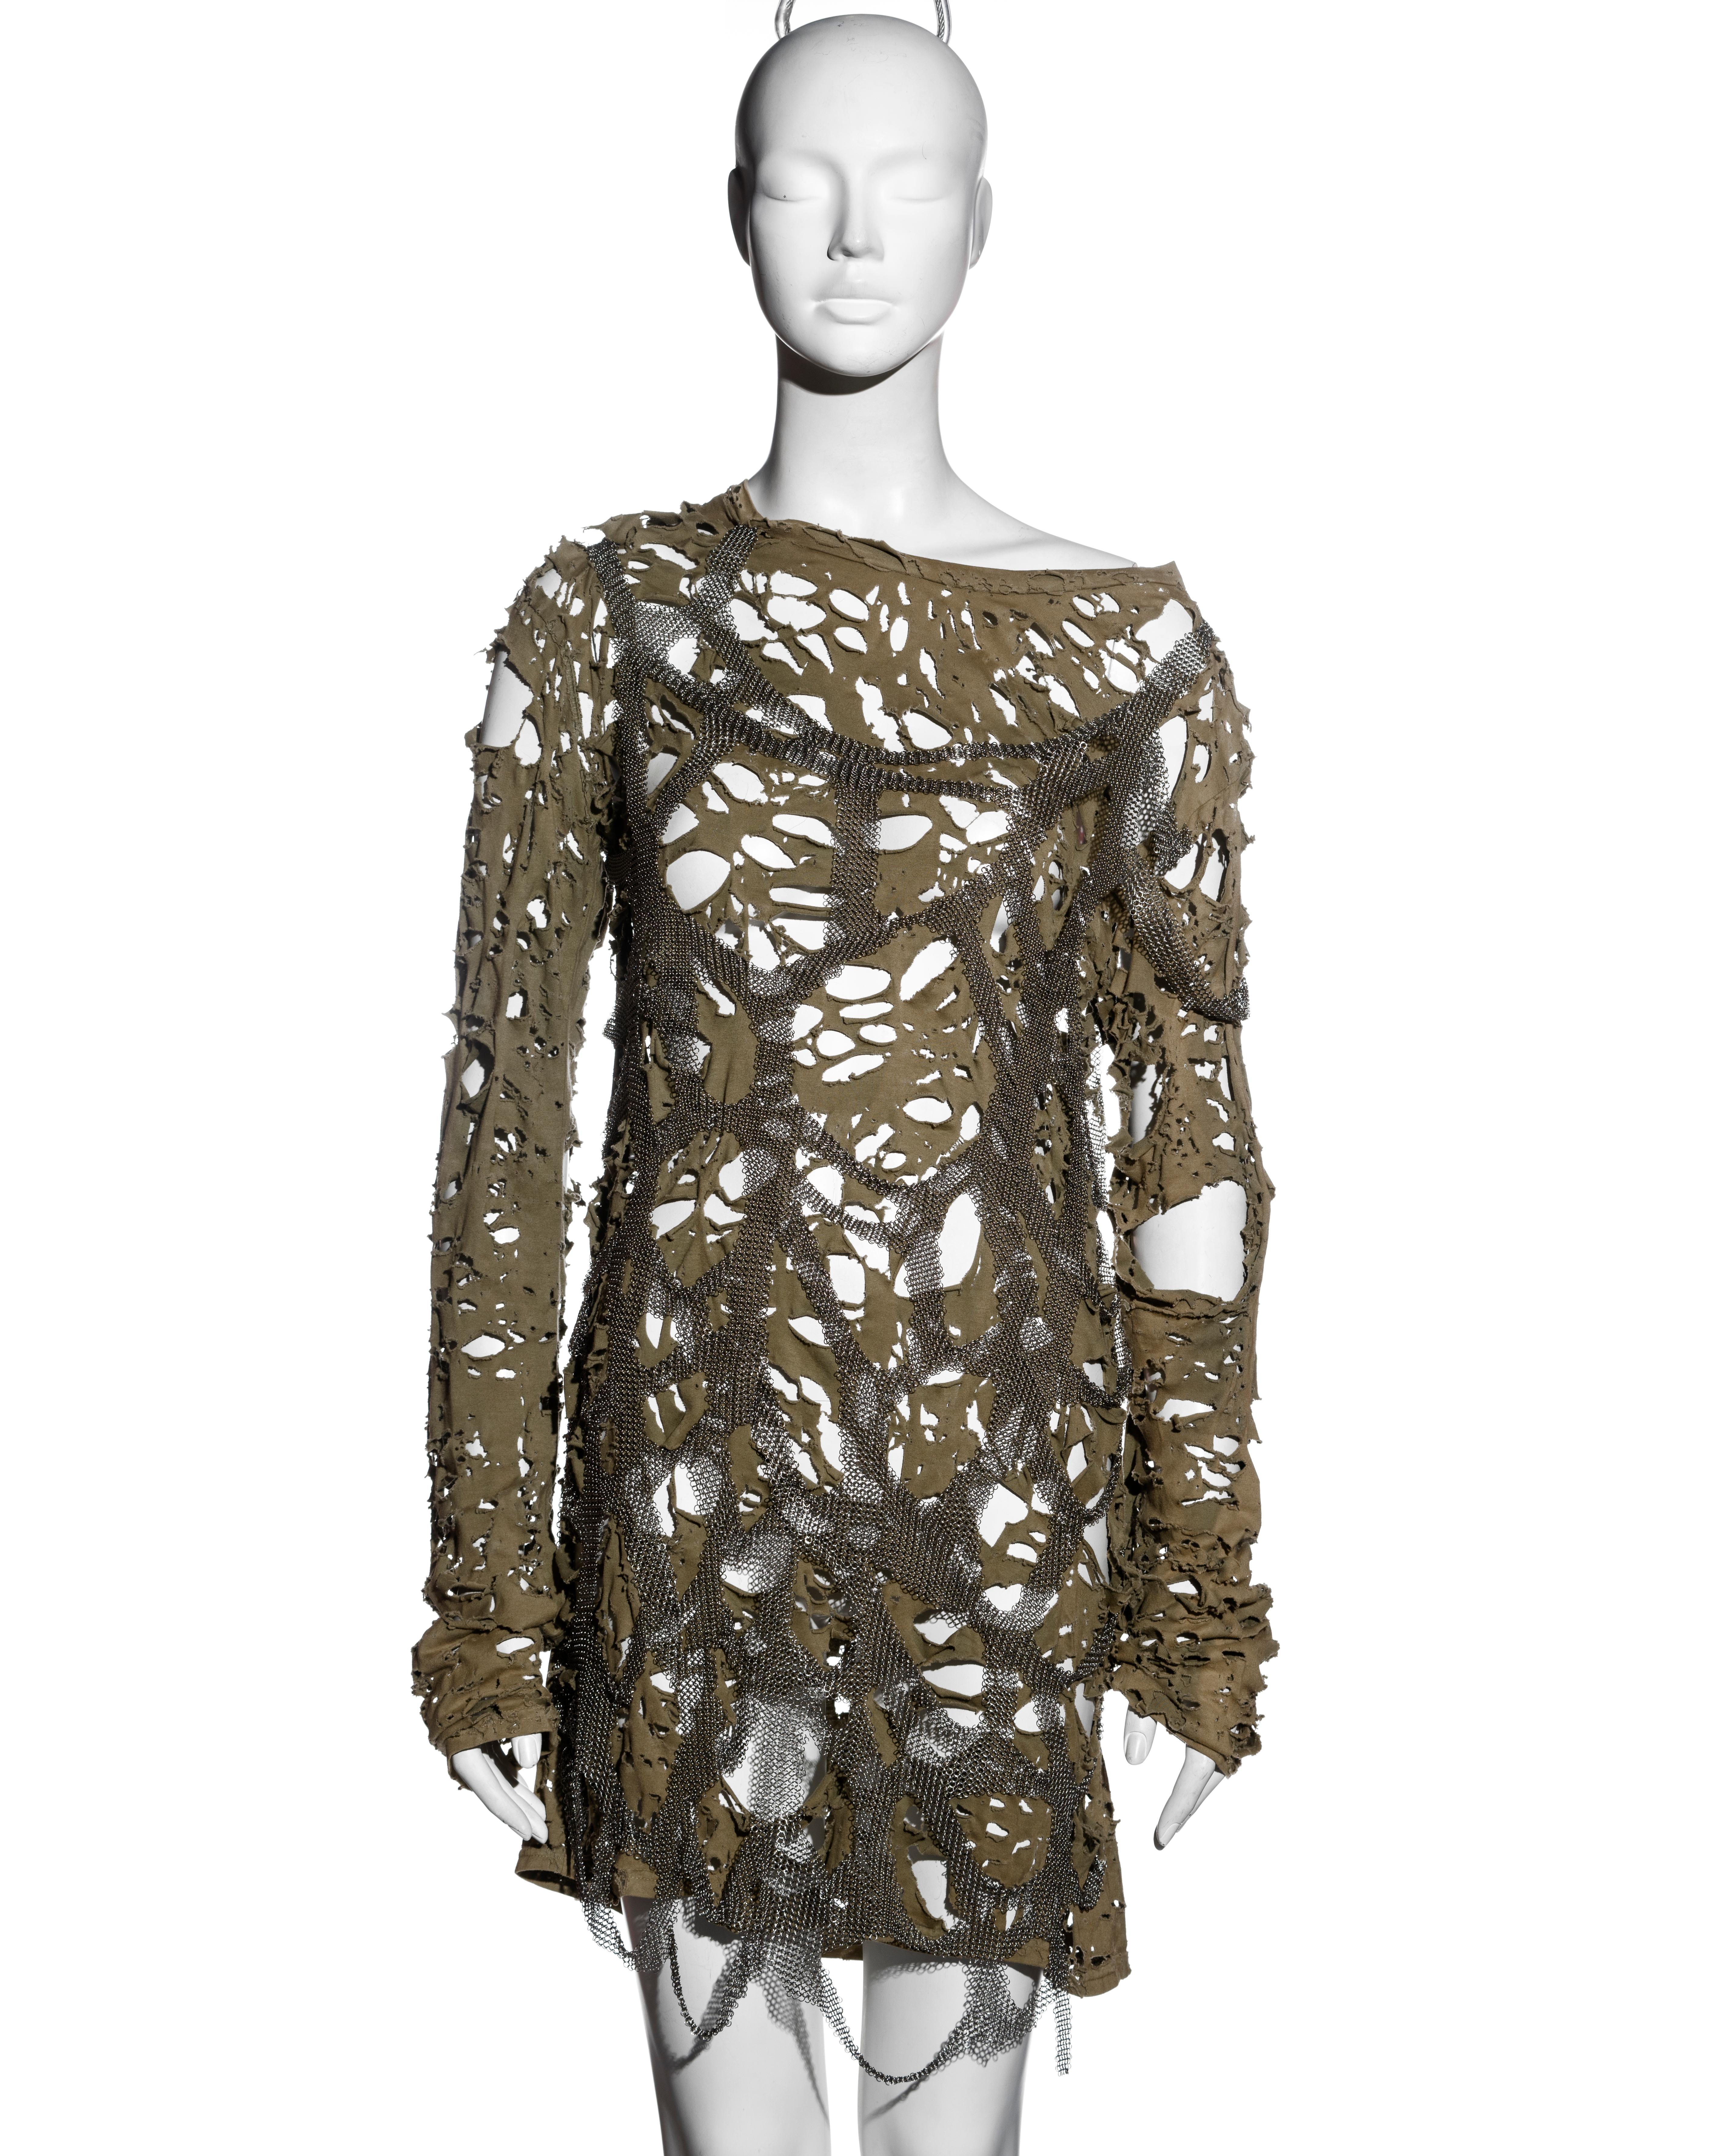 ▪ Balmain destroyed khaki green jersey mini dress
▪ Designed by Christophe Decarnin
▪ Rippings and holes allover the fabric
▪ Destroyed metal chainmail applied on top
▪ Wide neck 
▪ FR 38 - UK 10 - US 6
▪ Spring-Summer 2010